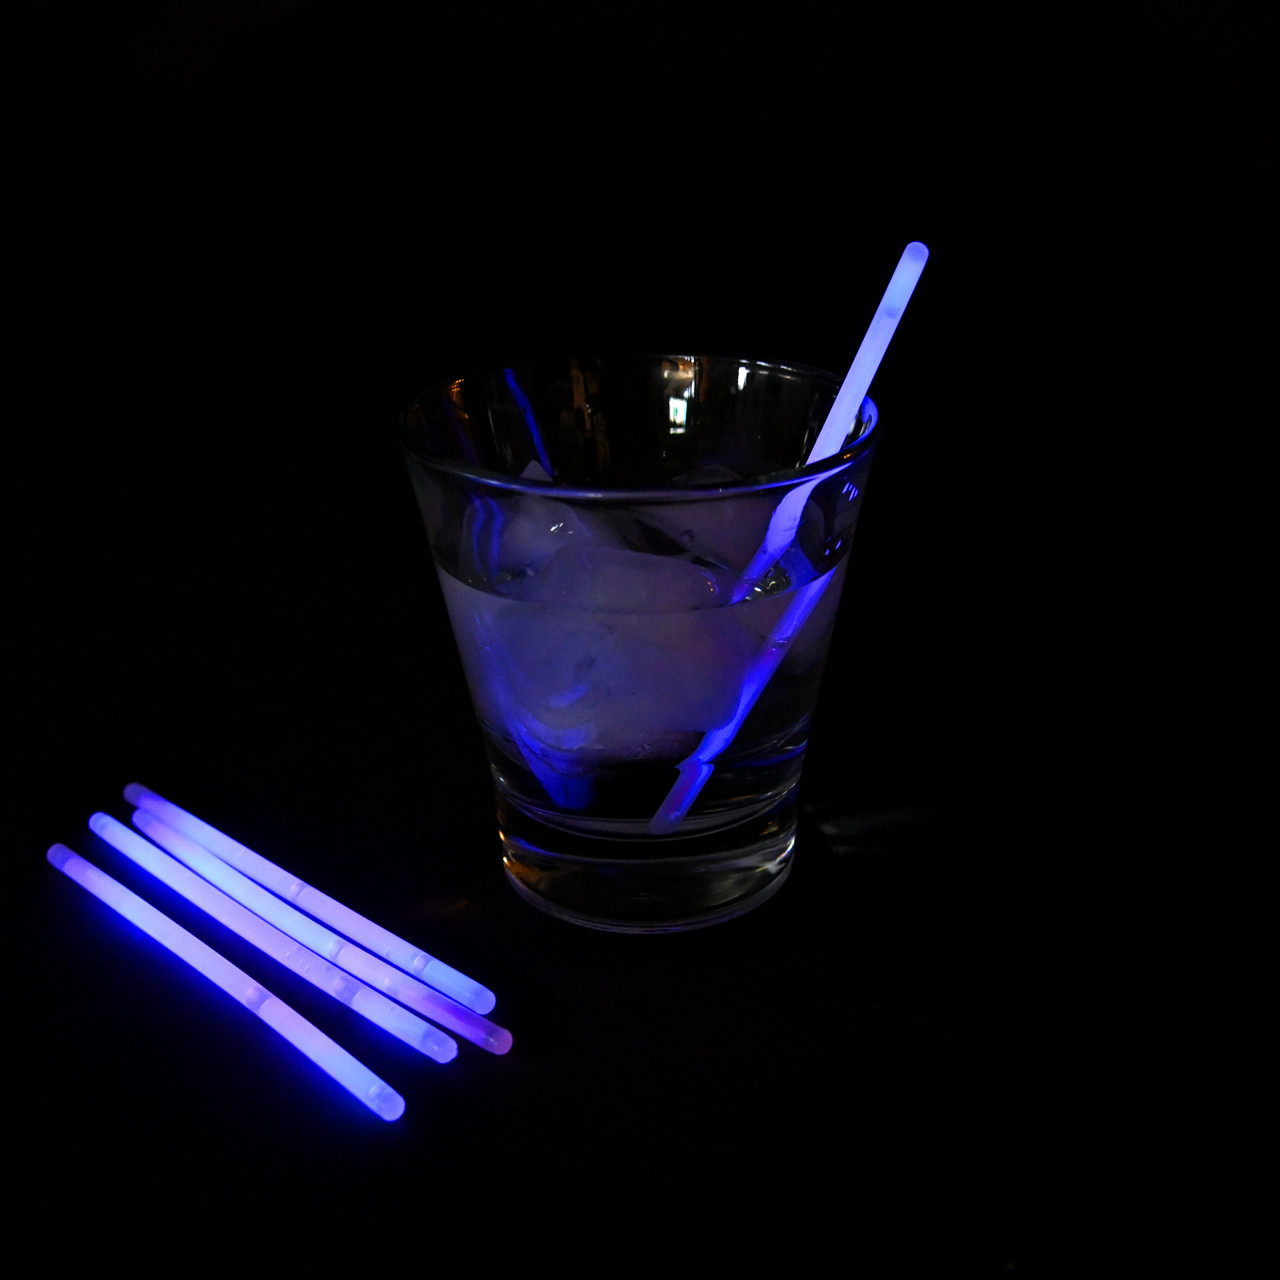 Glow stick shaker And Drink At A Time, Neon Sticks